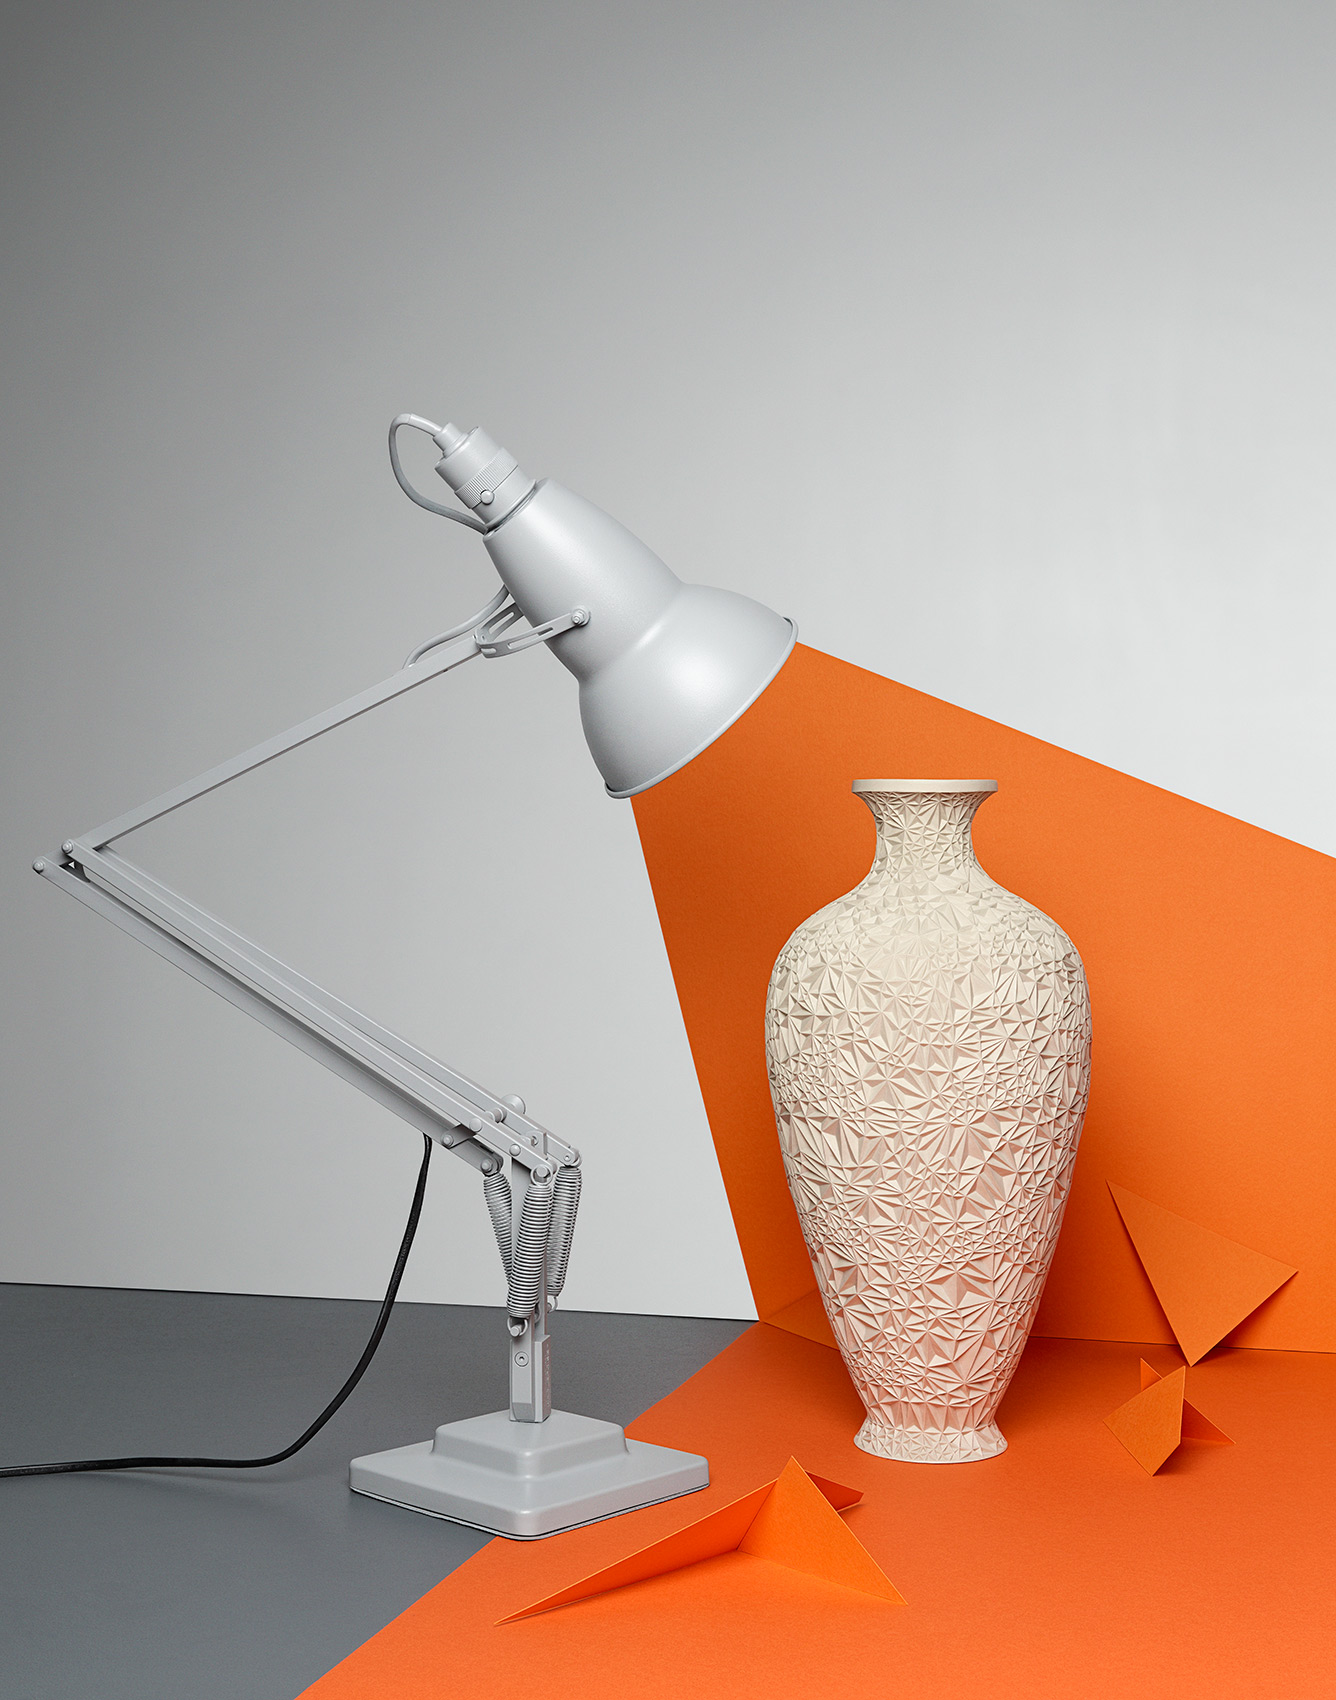 Orange beam of light coming from anglepoise lamp by Alexander Kent London based still life and product photographer.